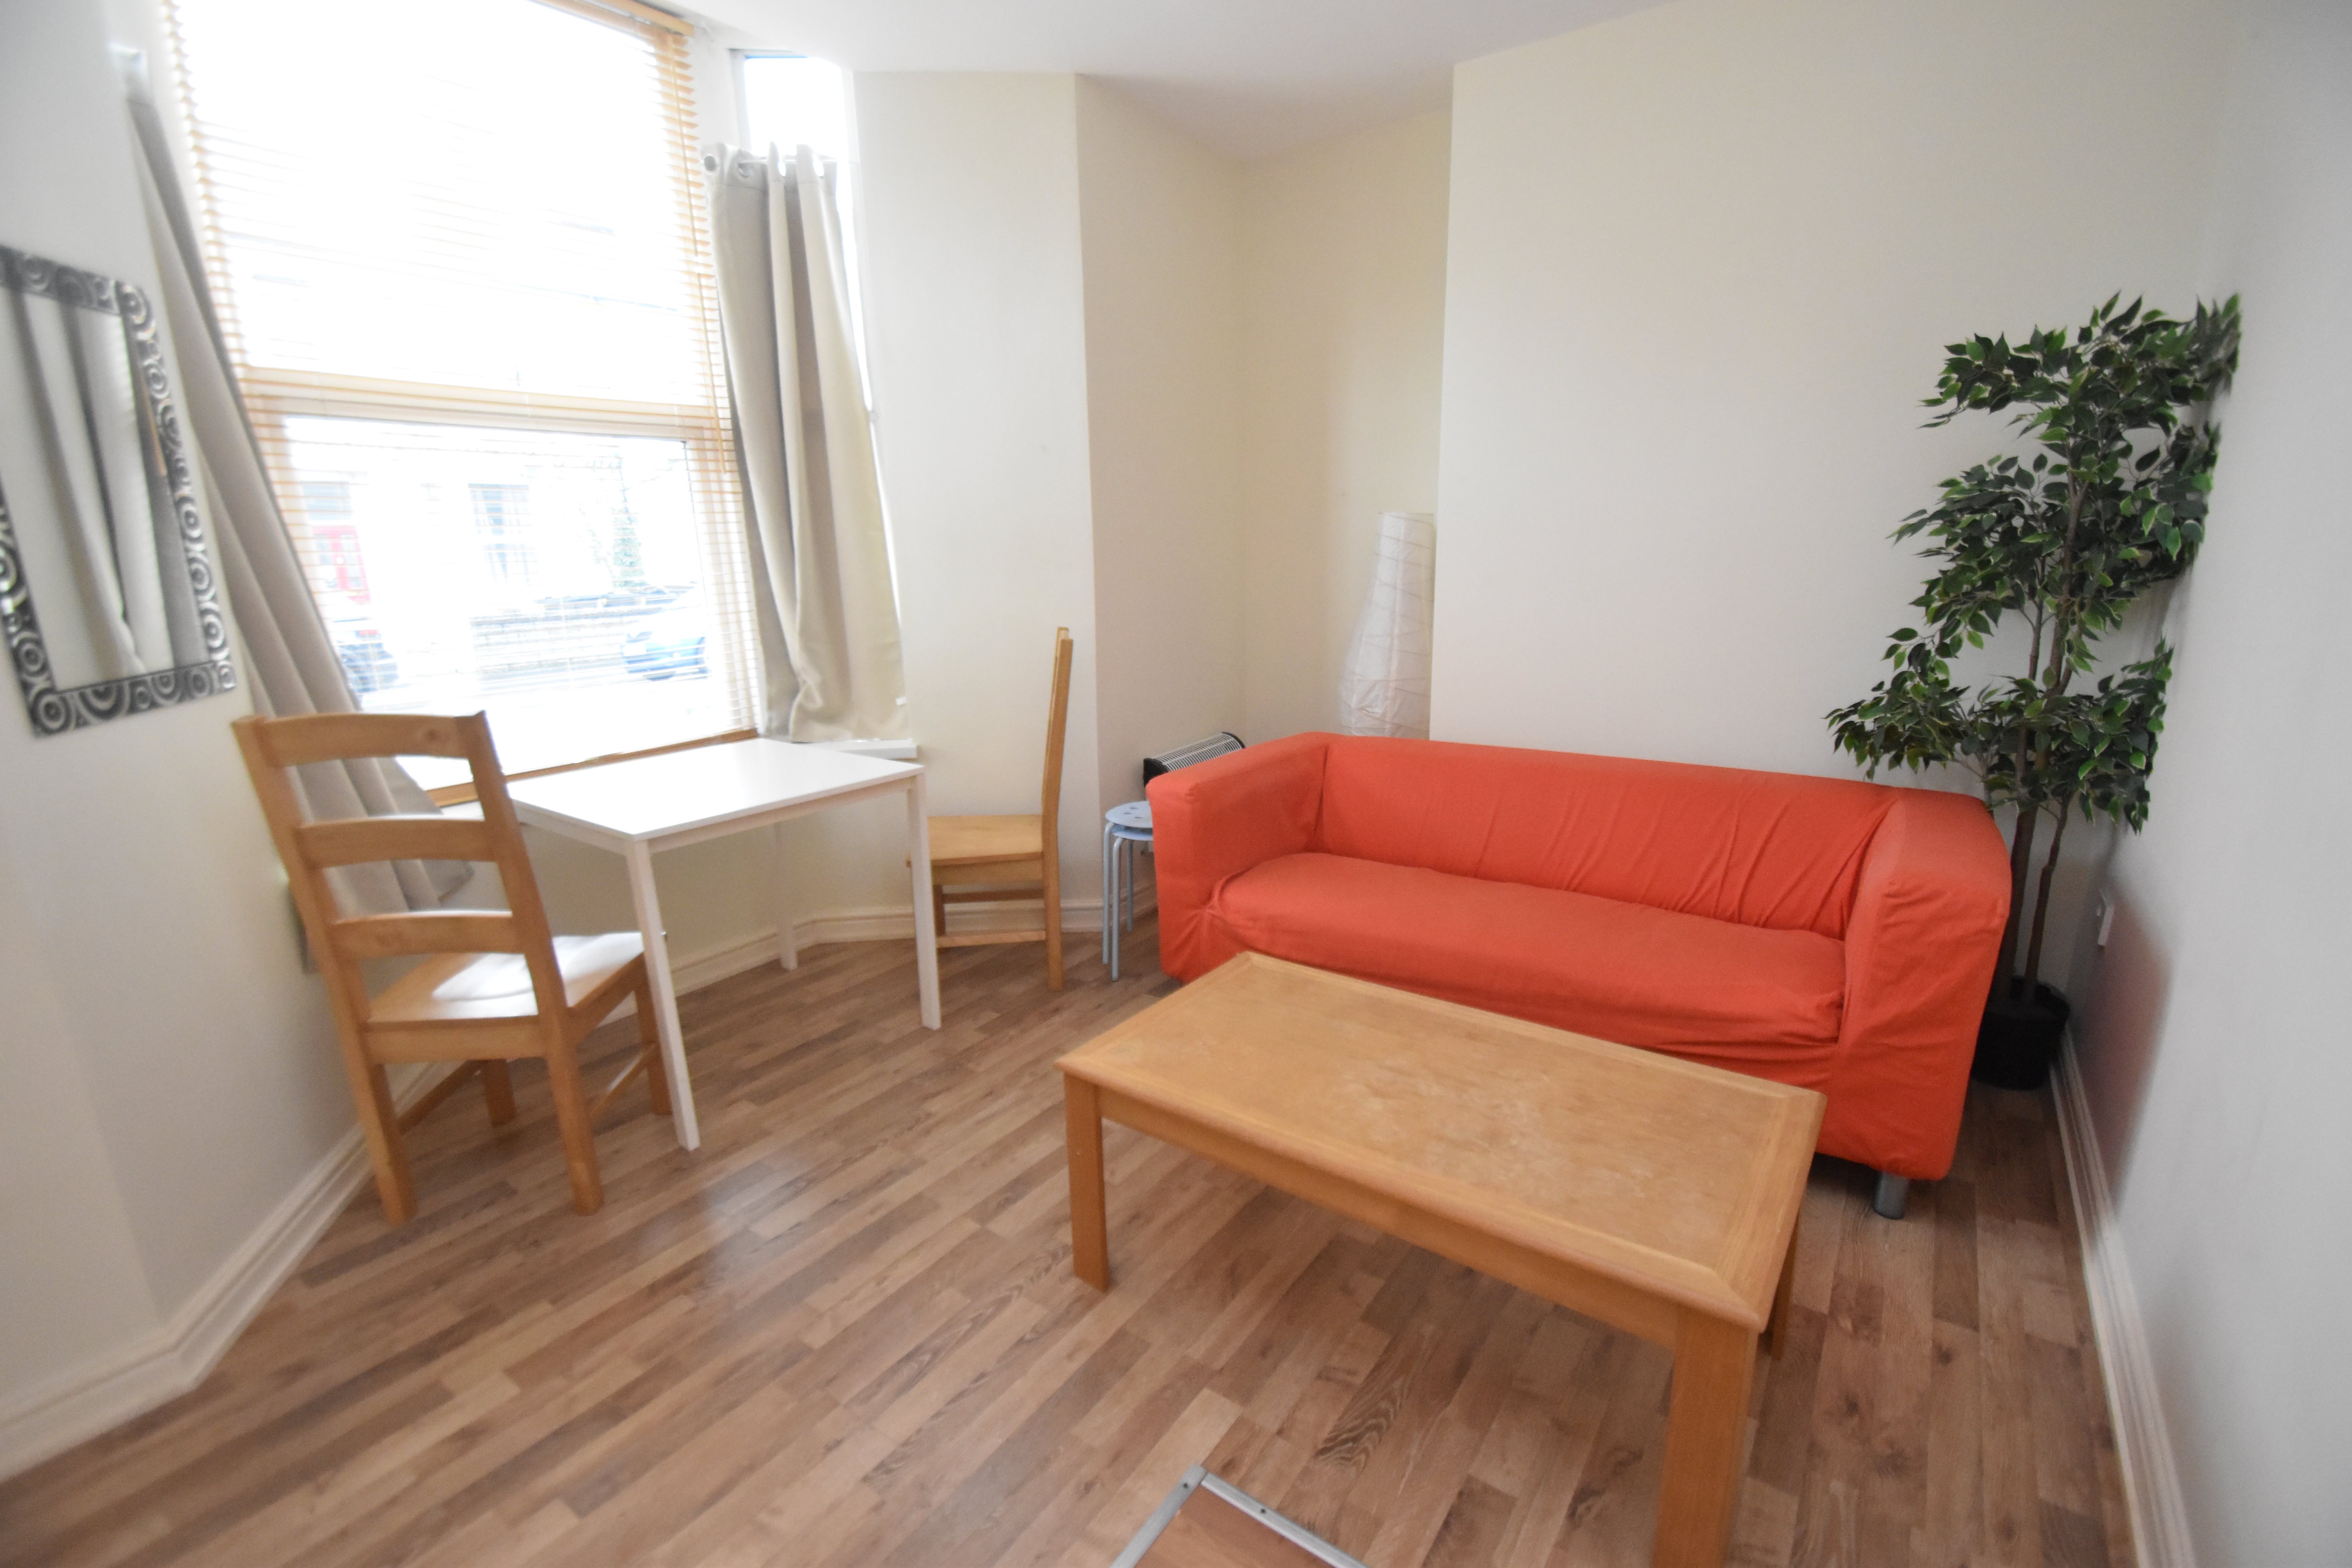 1 bed flat to rent in Piercefield Place, ADAMSDOWN  - Property Image 2